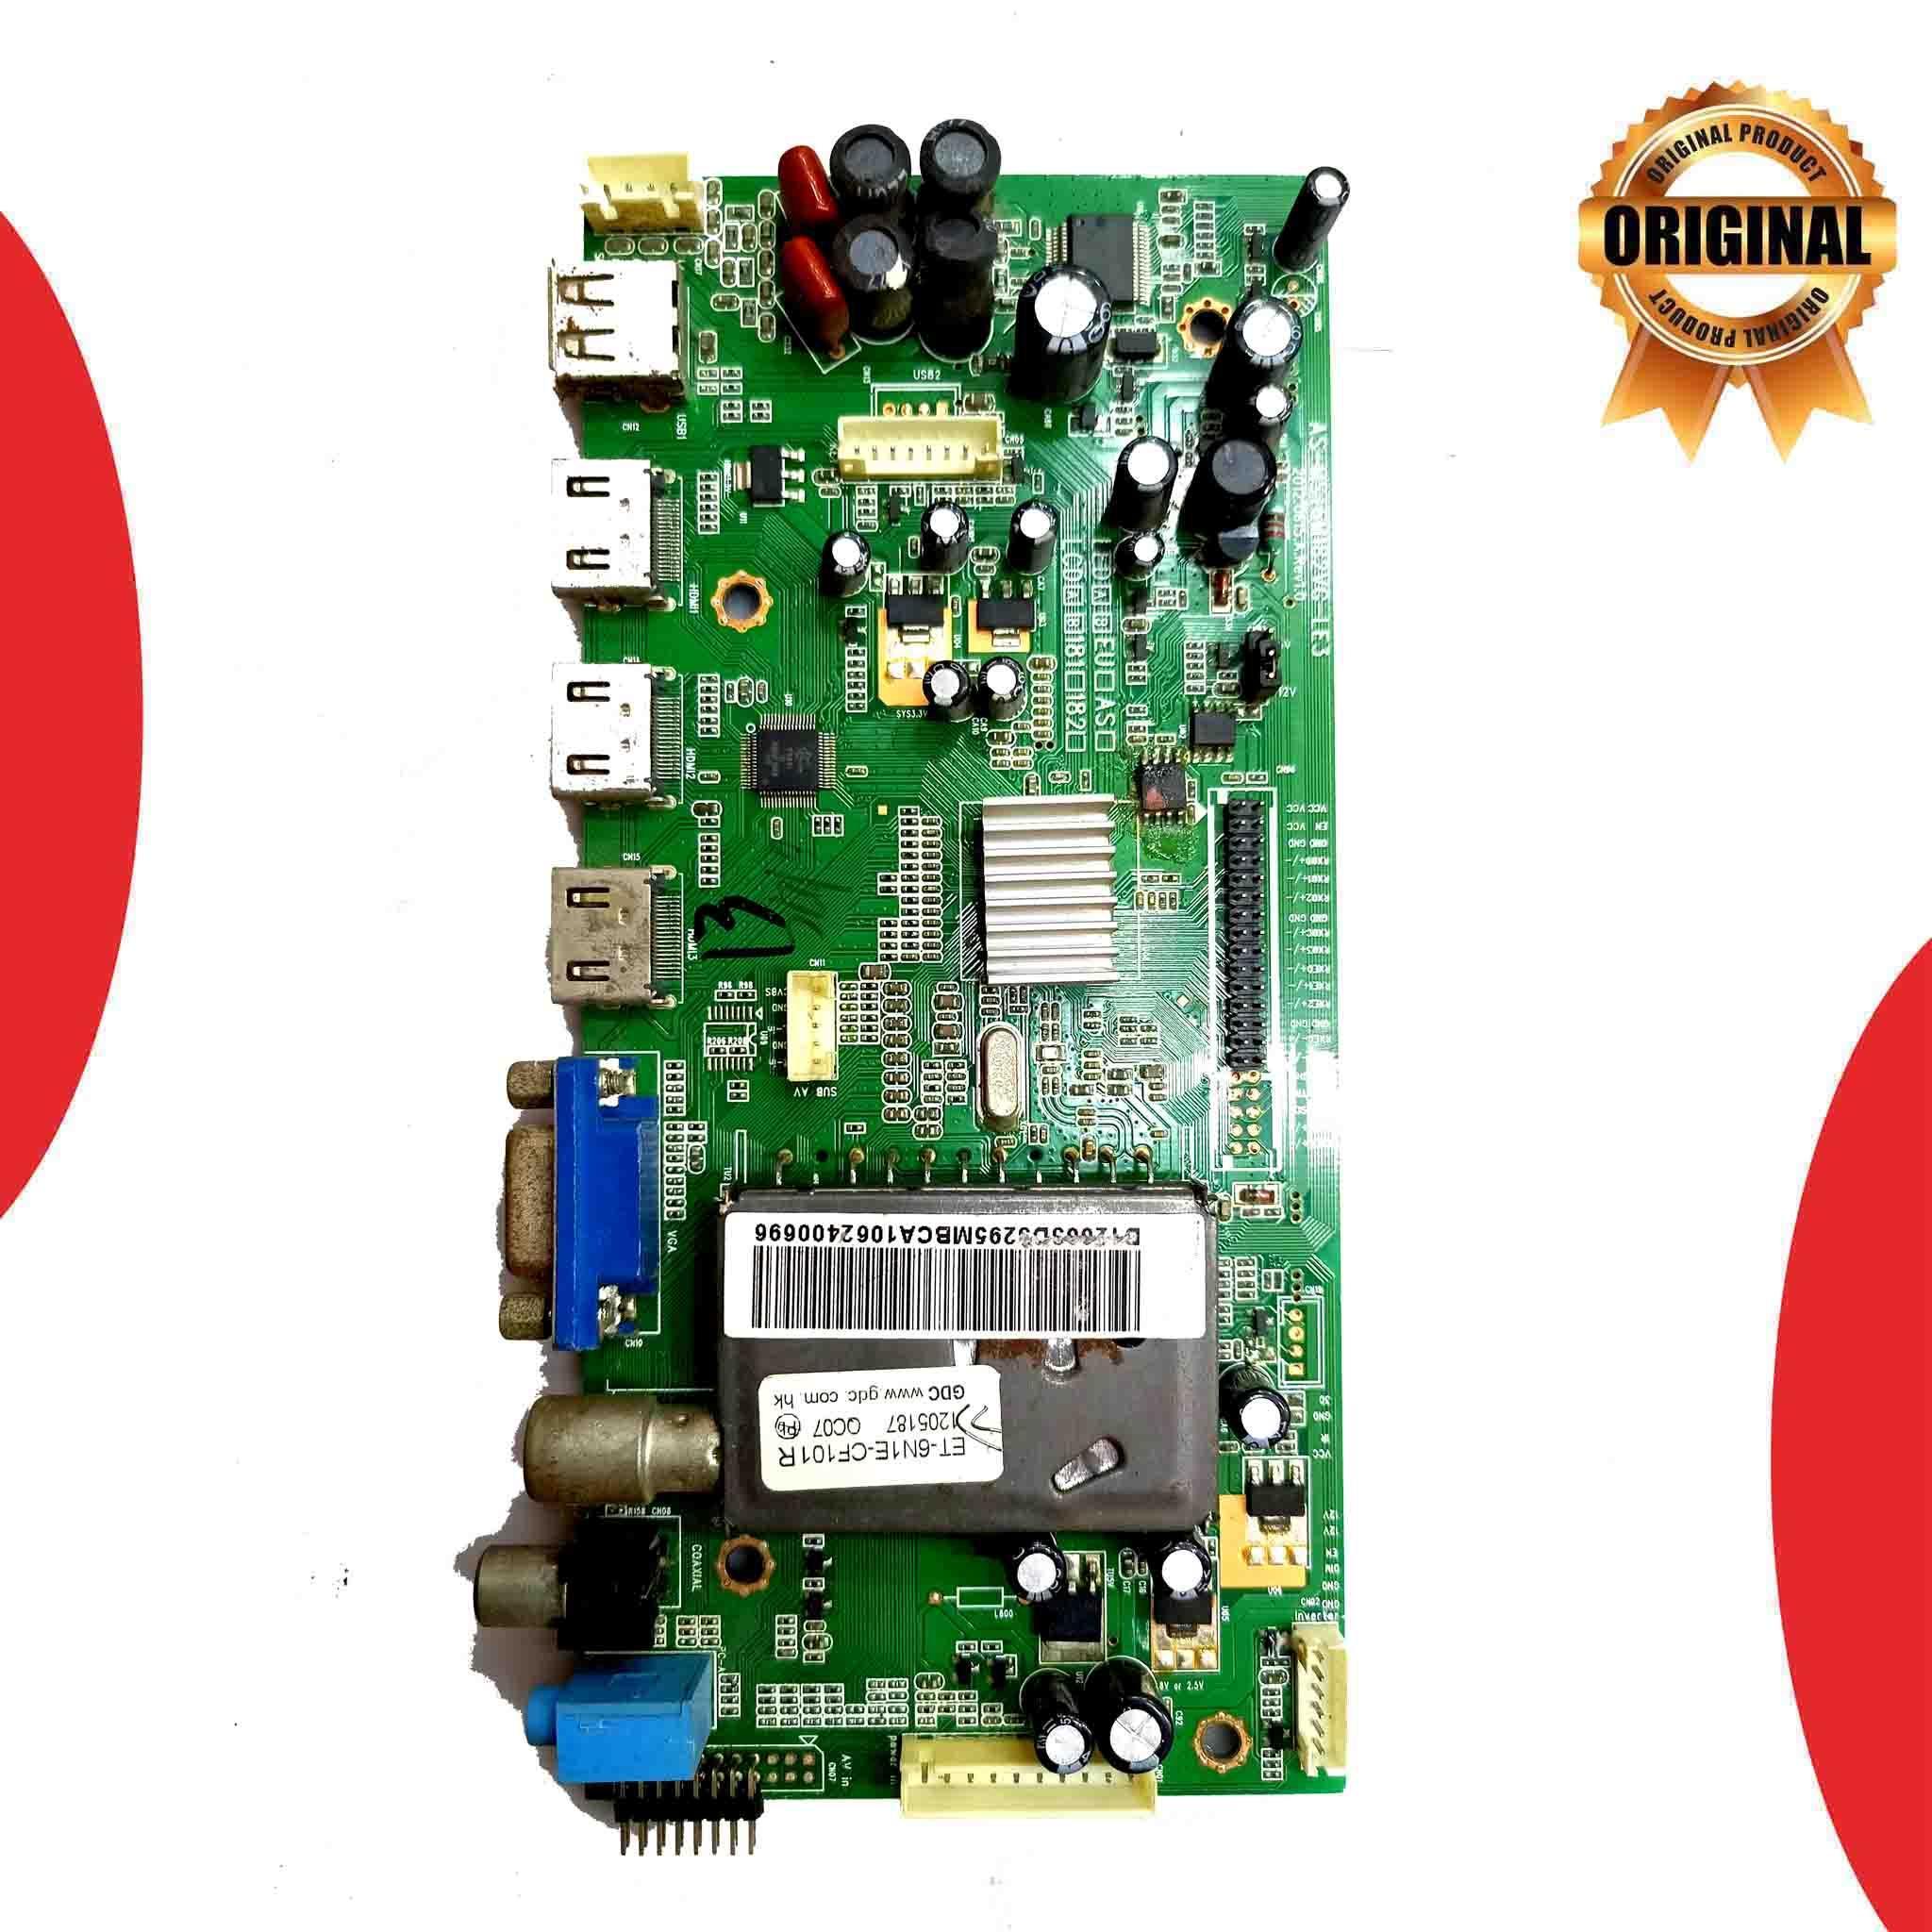 Reconnect 32 inch LED TV Motherboard for Model RELEG3203 - Great Bharat Electronics